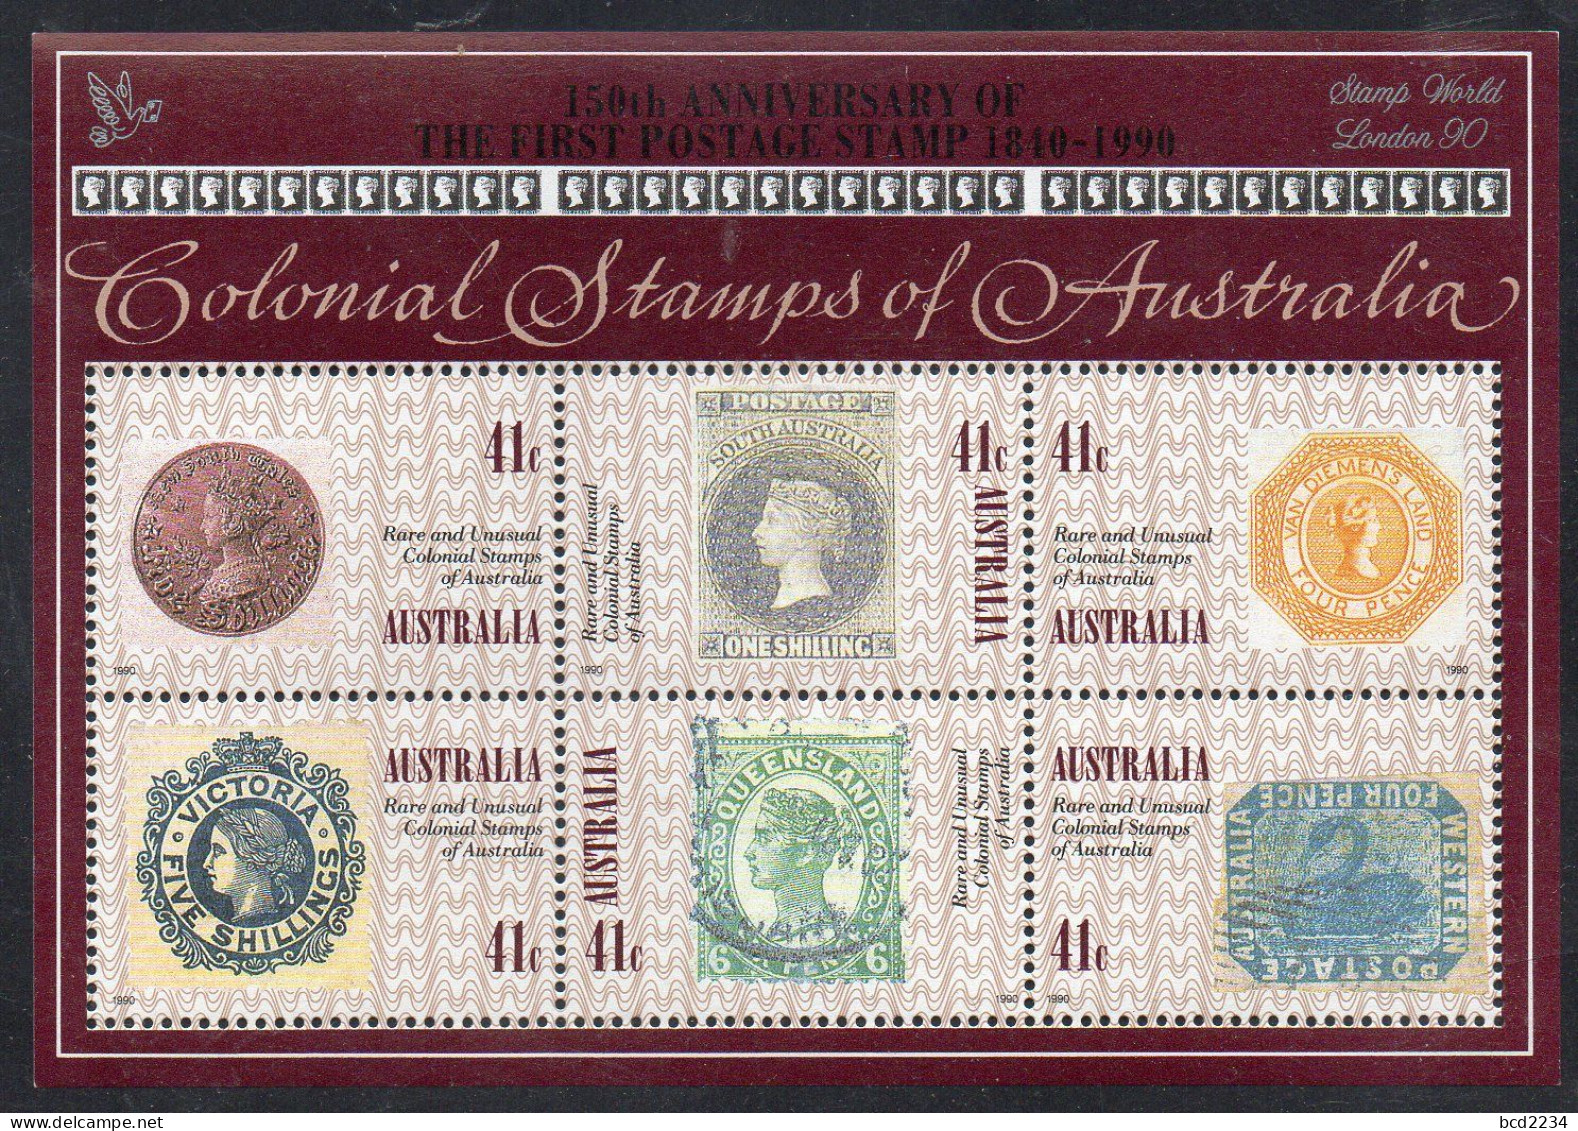 AUSTRALIA 1990 RARE & UNUSUAL COLONIAL STAMPS + SILVER STAMP WORLD LONDON 90 OVERPRINT SG MS1253 Mi BL 10 MNH - Covers & Documents